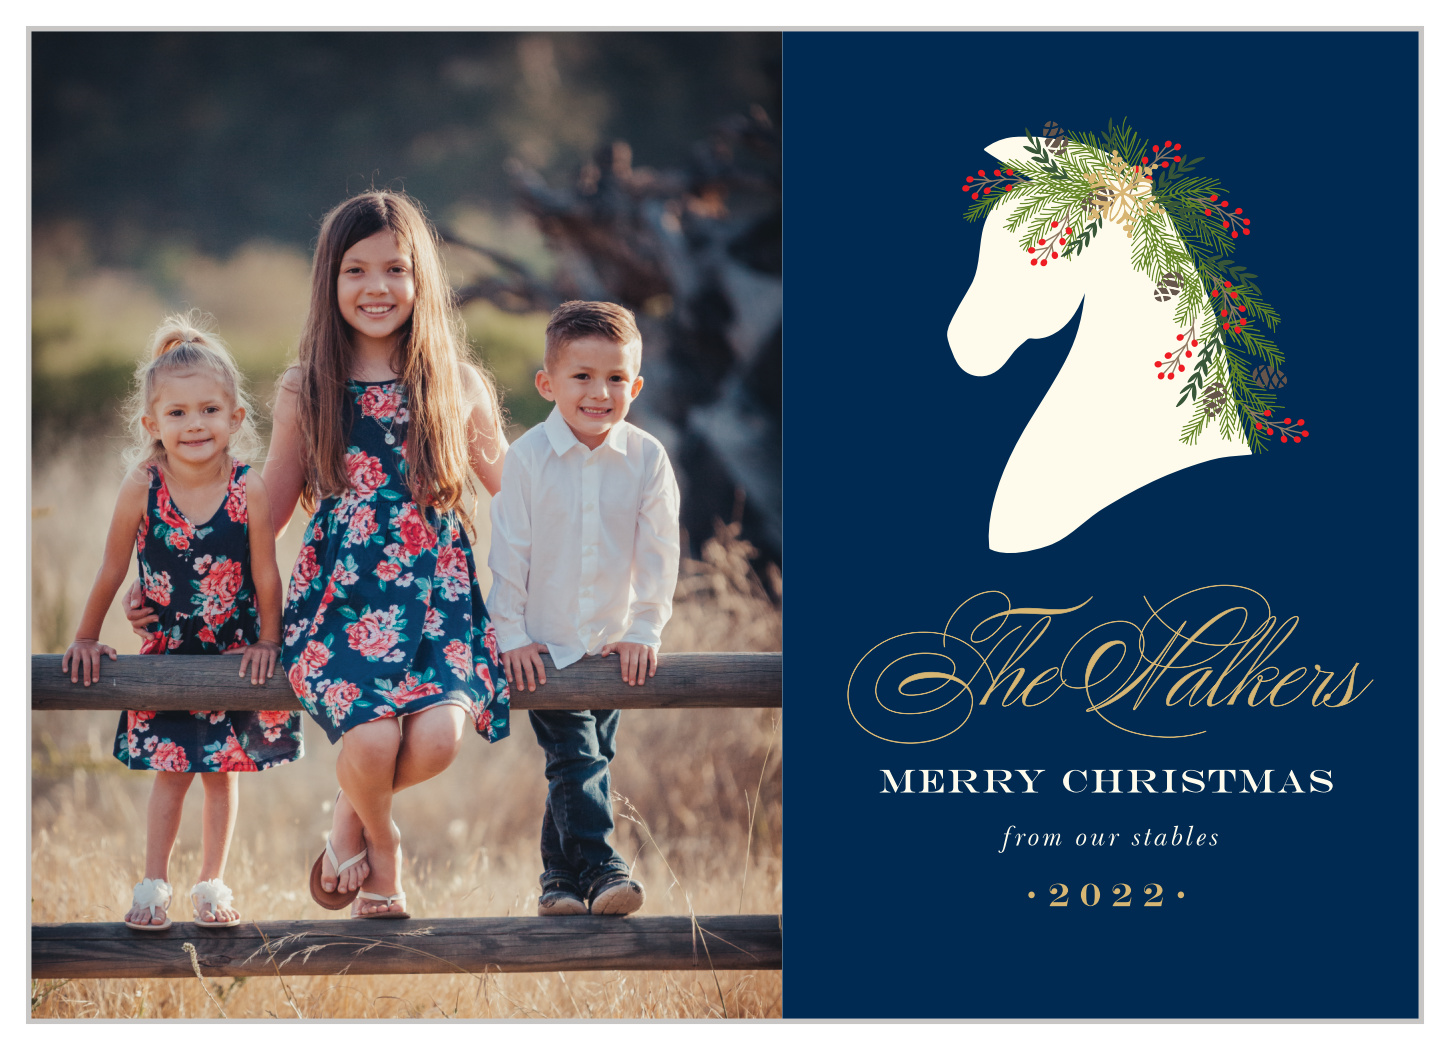 Stable Horses Christmas Cards